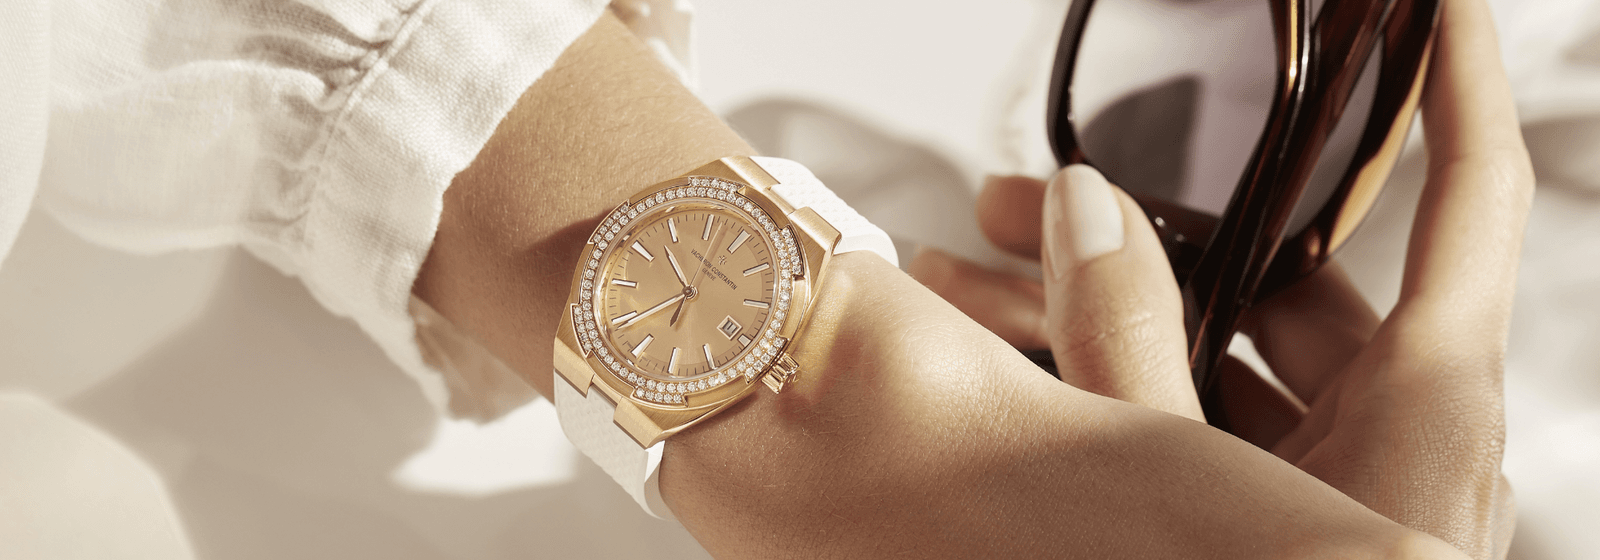 Vacheron Constantin - New Pink Gold Overseas with Matching Dial